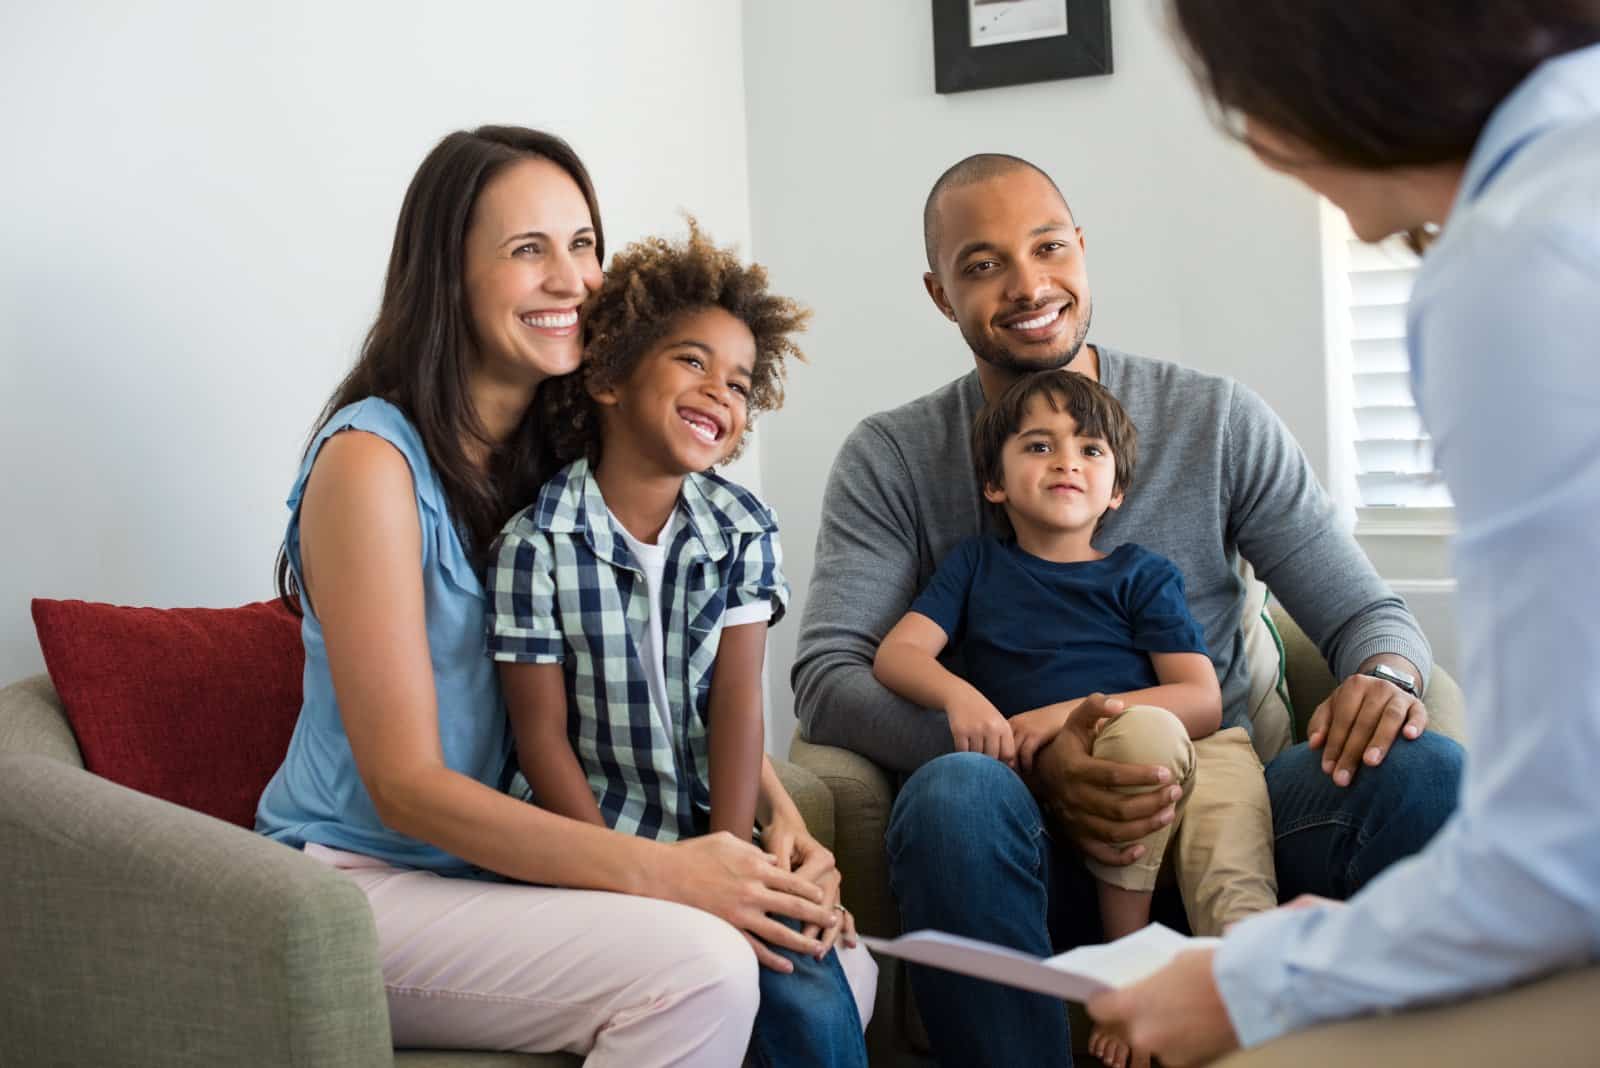 <p class="wp-caption-text">Image Credit: Shutterstock / Ground Picture</p>  <p><span>Commit to implementing these research-backed strategies to navigate family dynamics with compassion, understanding, and effectiveness. Embrace the opportunity to cultivate a harmonious and supportive family environment characterized by mutual respect, trust, and open communication.</span></p> <p><span>More Articles Like This…</span></p> <p><a href="https://thegreenvoyage.com/barcelona-discover-the-top-10-beach-clubs/"><span>Barcelona: Discover the Top 10 Beach Clubs</span></a></p> <p><a href="https://thegreenvoyage.com/top-destination-cities-to-visit/"><span>2024 Global City Travel Guide – Your Passport to the World’s Top Destination Cities</span></a></p> <p><a href="https://thegreenvoyage.com/exploring-khao-yai-a-hidden-gem-of-thailand/"><span>Exploring Khao Yai 2024 – A Hidden Gem of Thailand</span></a></p> <p><span>The post <a href="https://passingthru.com/family-travel-trends/">Top 18 Family Travel Trends for 2024</a> republished on </span><a href="https://passingthru.com/"><span>Passing Thru</span></a><span> with permission from </span><a href="https://thegreenvoyage.com/"><span>The Green Voyage</span></a><span>.</span></p> <p><span>Featured Image Credit: Shutterstock / New Africa.</span></p> <p><span>For transparency, this content was partly developed with AI assistance and carefully curated by an experienced editor to be informative and ensure accuracy.</span></p>